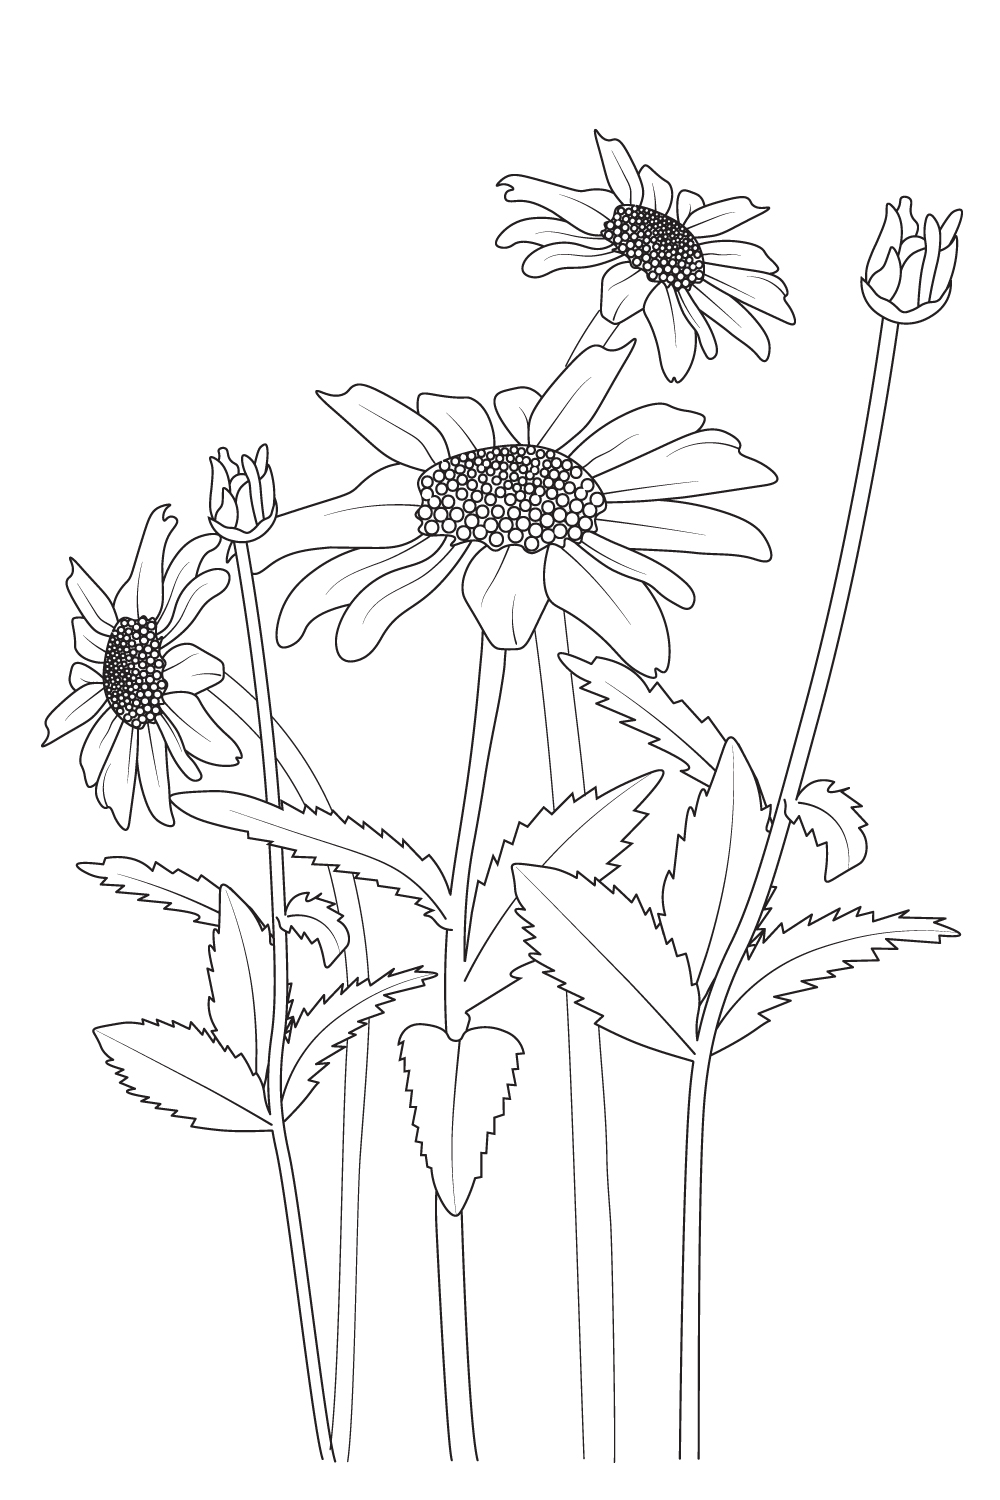 botanical daisy flower illustration daisy flower branch vector line art, daisy drawing, daisy drawing outline pinterest preview image.